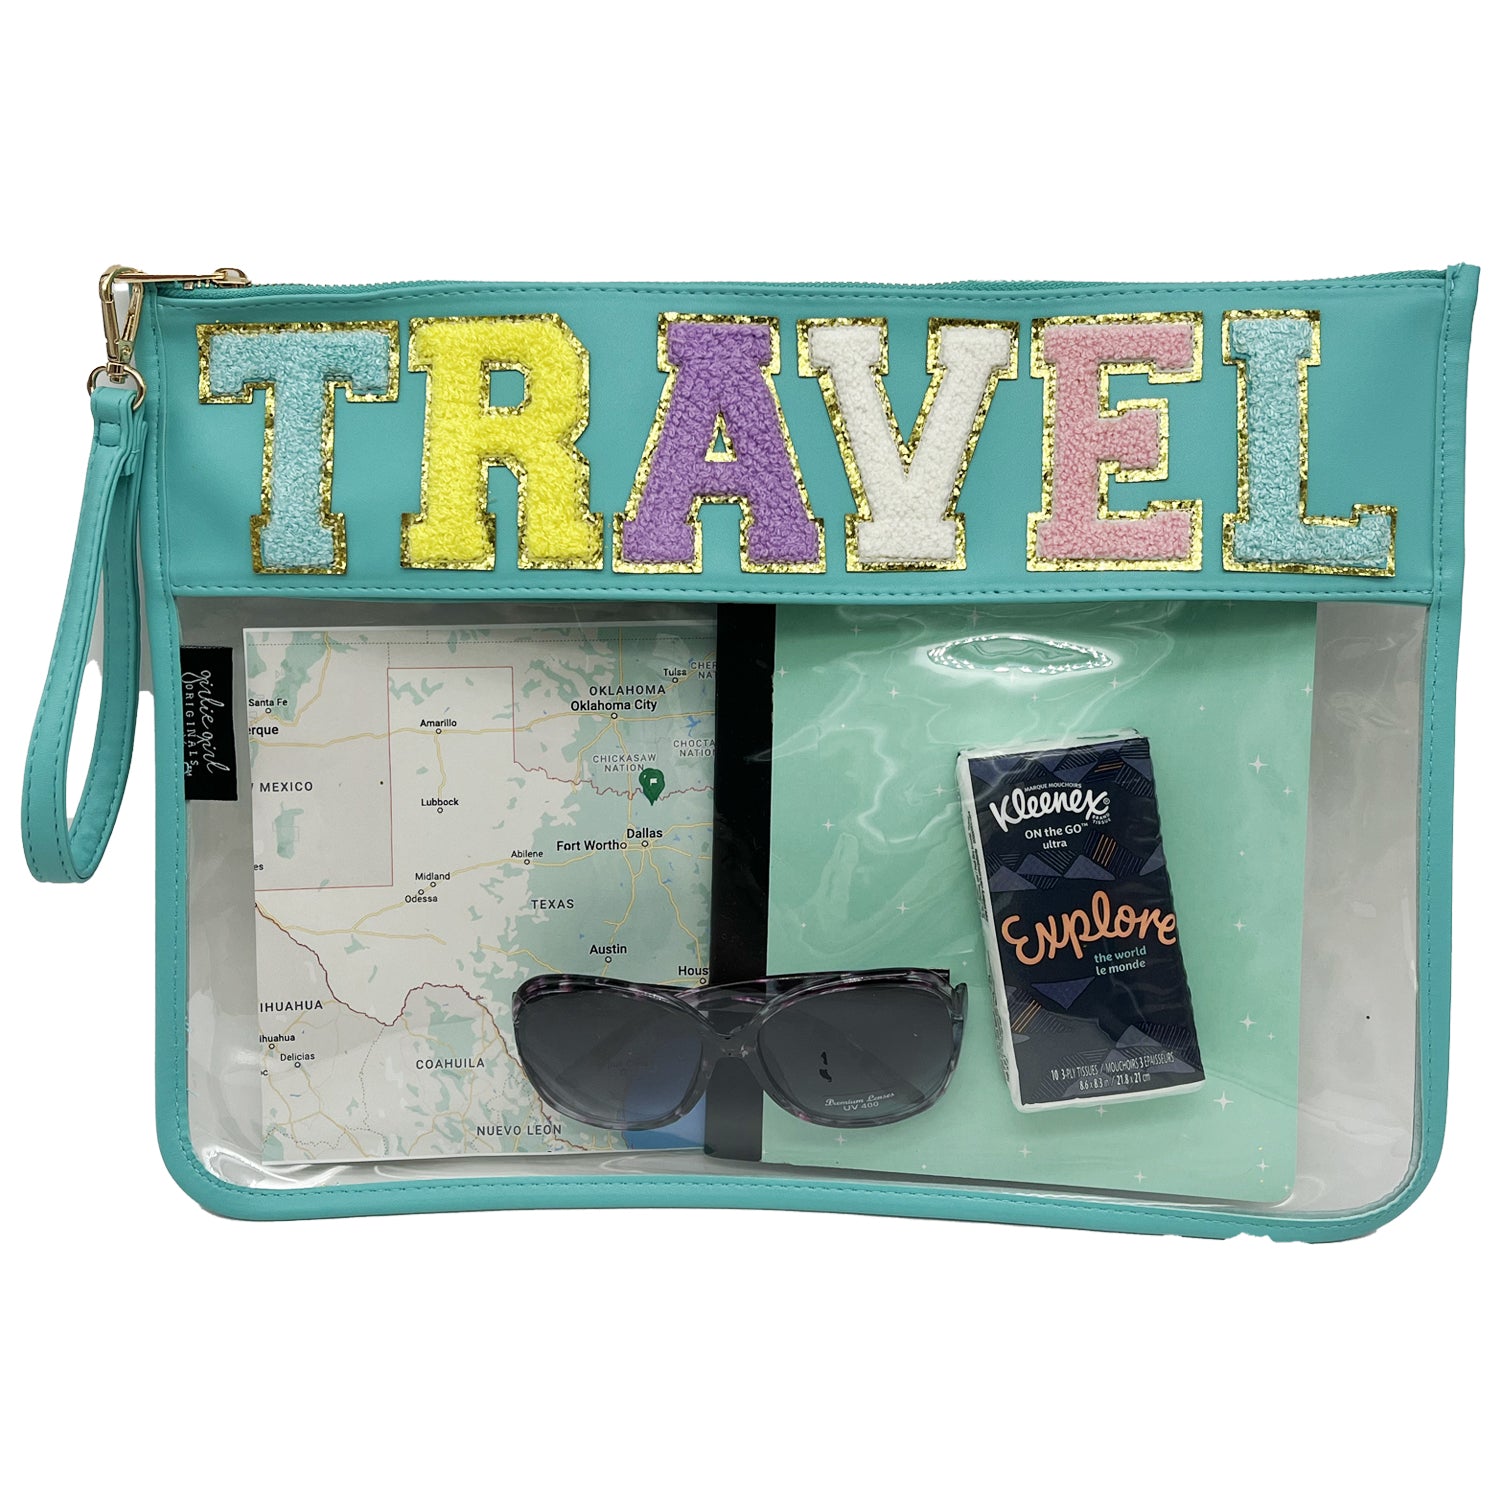 CP-1217 Travel Mint Candy Bag